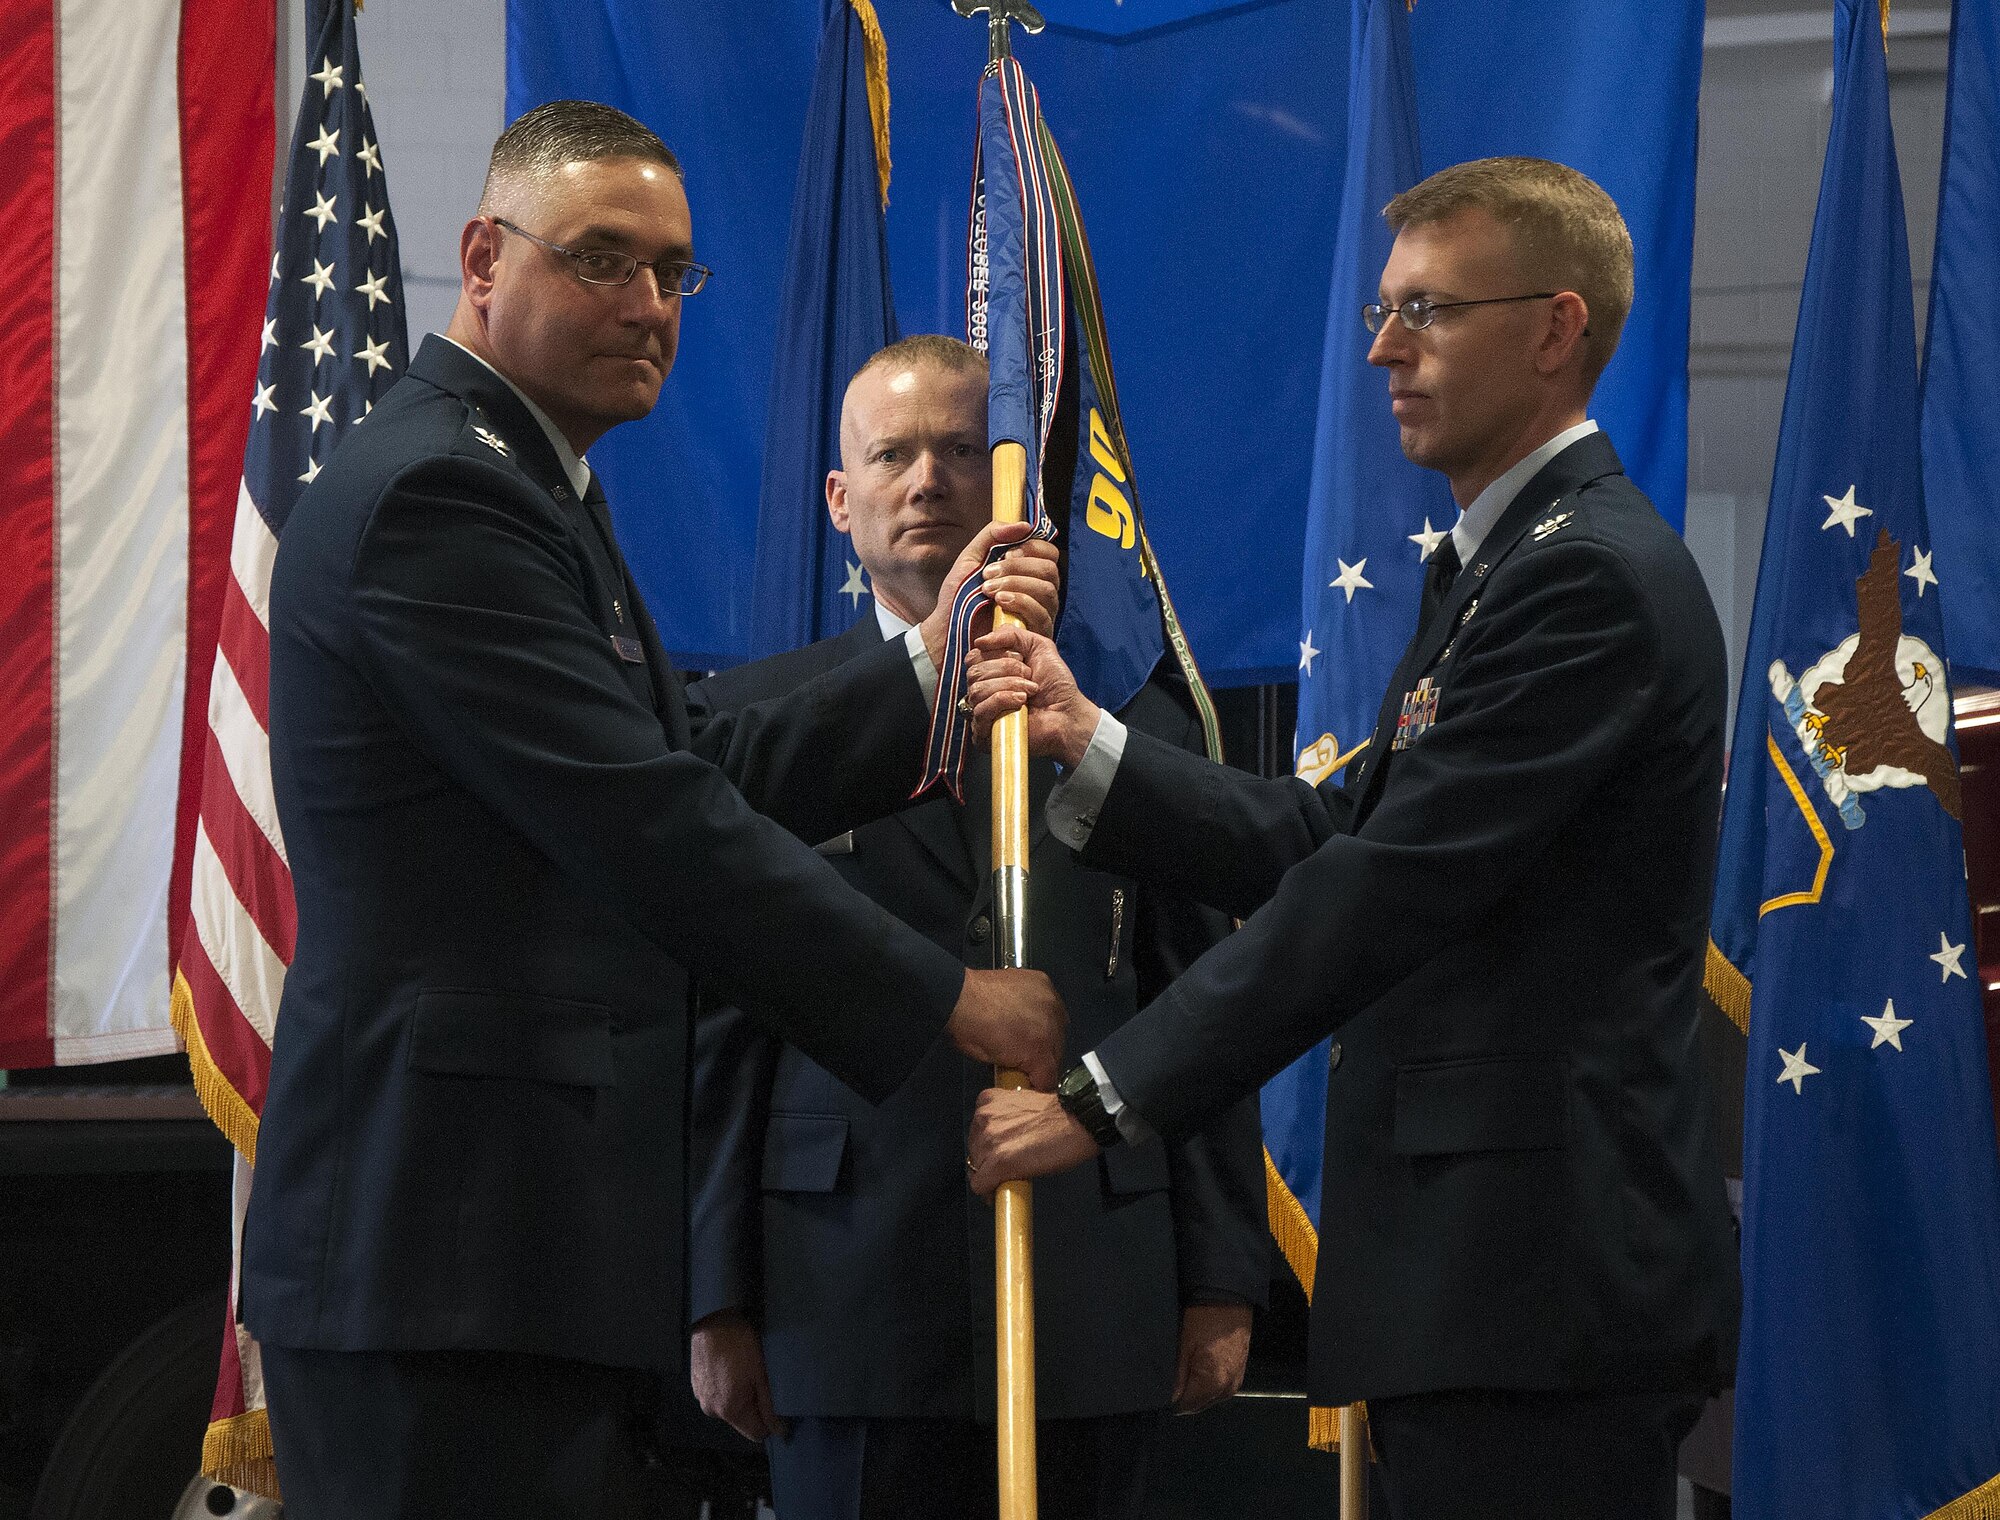 Col. Greg Buckner, 90th Maintenance Group commander, takes the 90th MXG guidon from Col. Stephen Kravitsky, 90th Missile Wing commander, during a change-of-command ceremony June 3, 3016, inside the Maintenance High Bay on F.E. Warren Air Force Base, Wyo. The passing of the guidon stems from military tradition, with the guidon symbolizing a flag that soldiers would rally behind during battles. (U.S. Air Force photo by Senior Airman Brandon Valle)